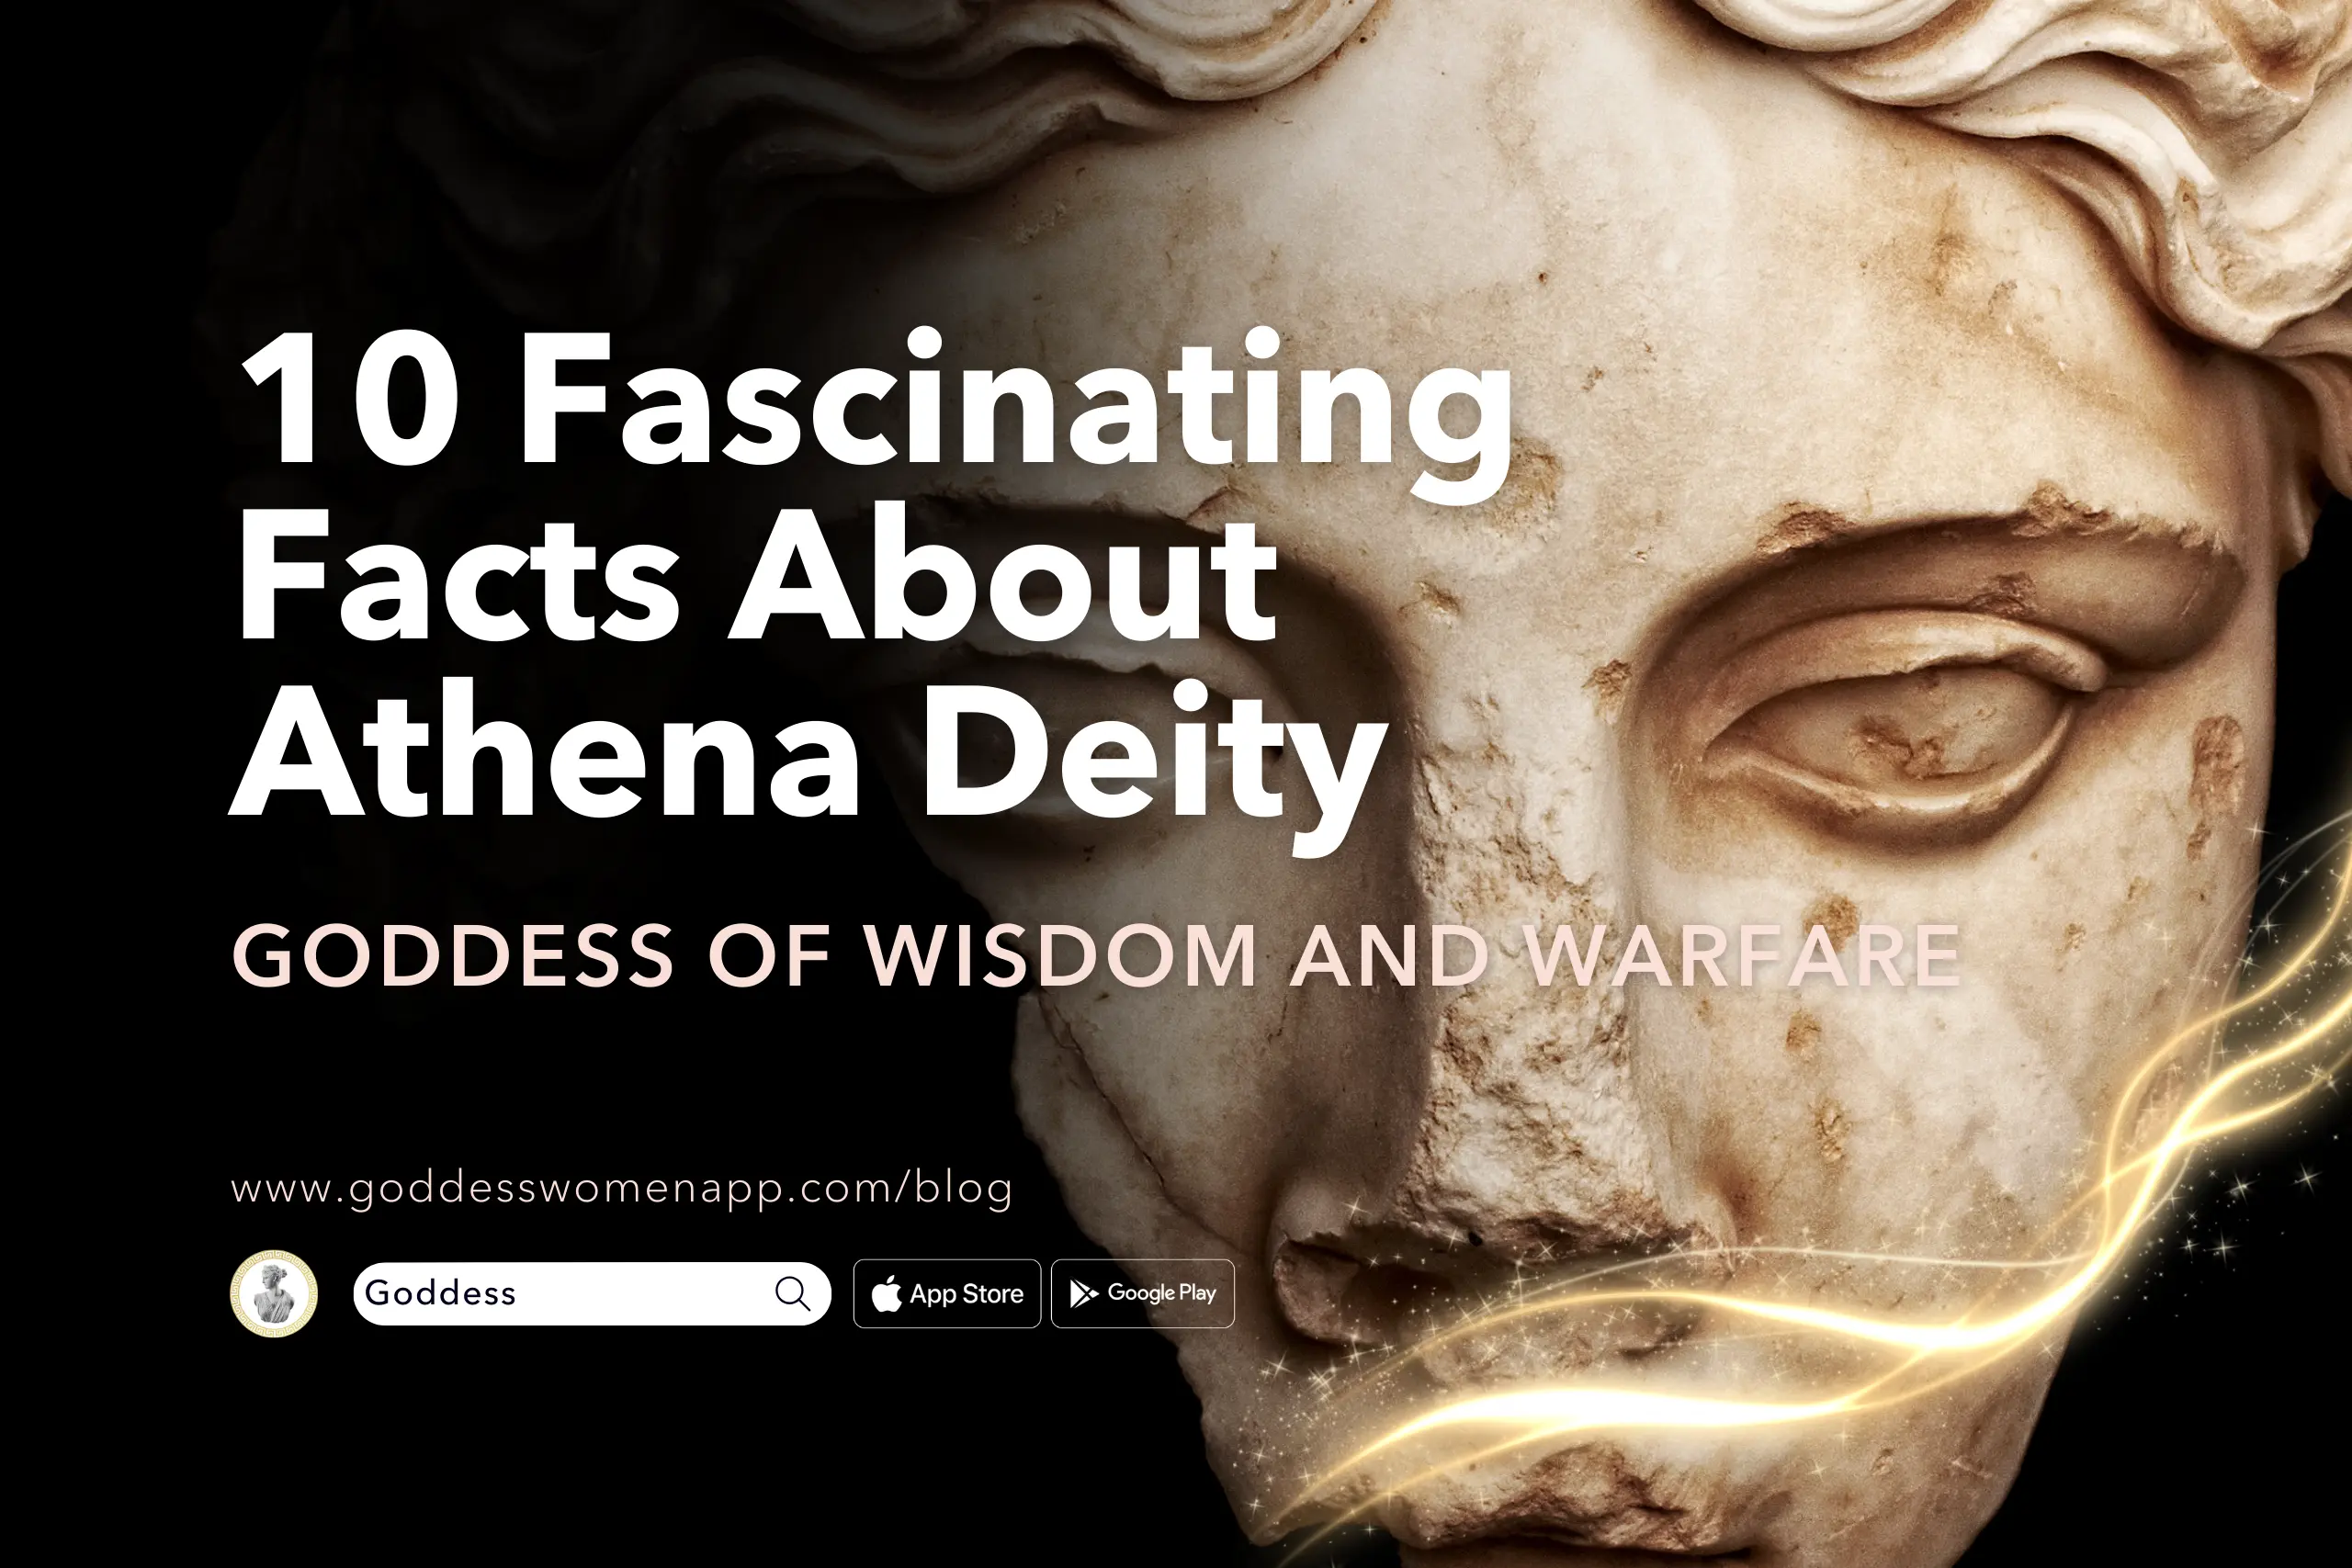 10 Fascinating Facts About Athena Deity, Goddess of Wisdom and Warfare